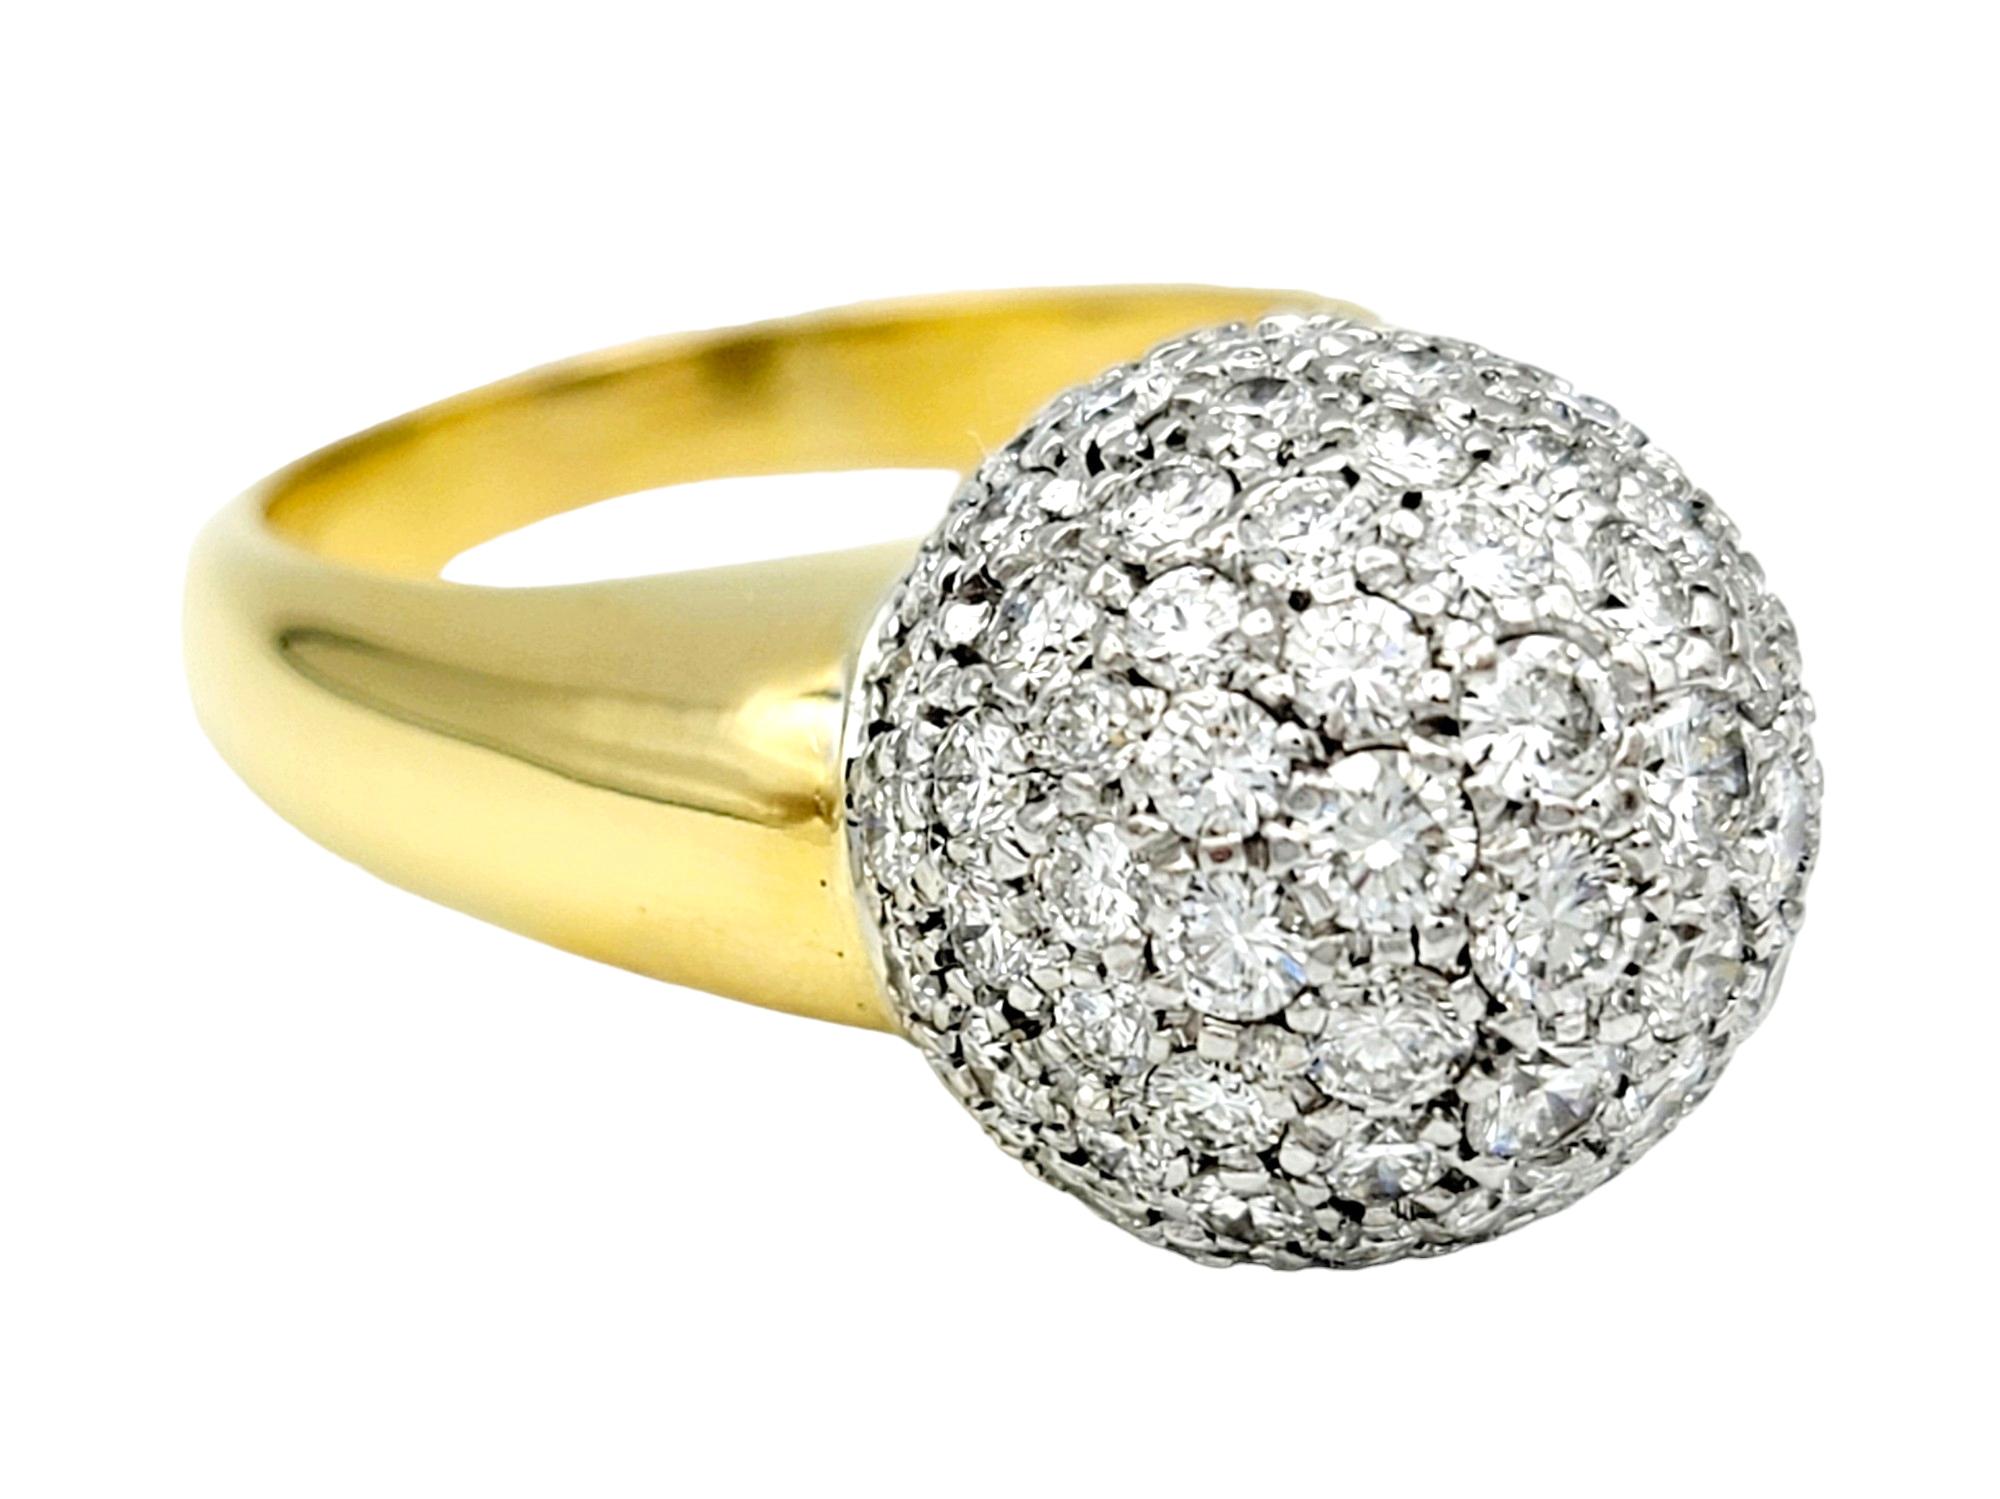 Ring Size: 8.75

Indulge in the luxurious allure of this 18 karat yellow gold band ring, designed to make a statement with every glance. At its apex sits a mesmerizing clustered diamond dome, boasting a remarkable 2.00 carats of diamonds, F-G in